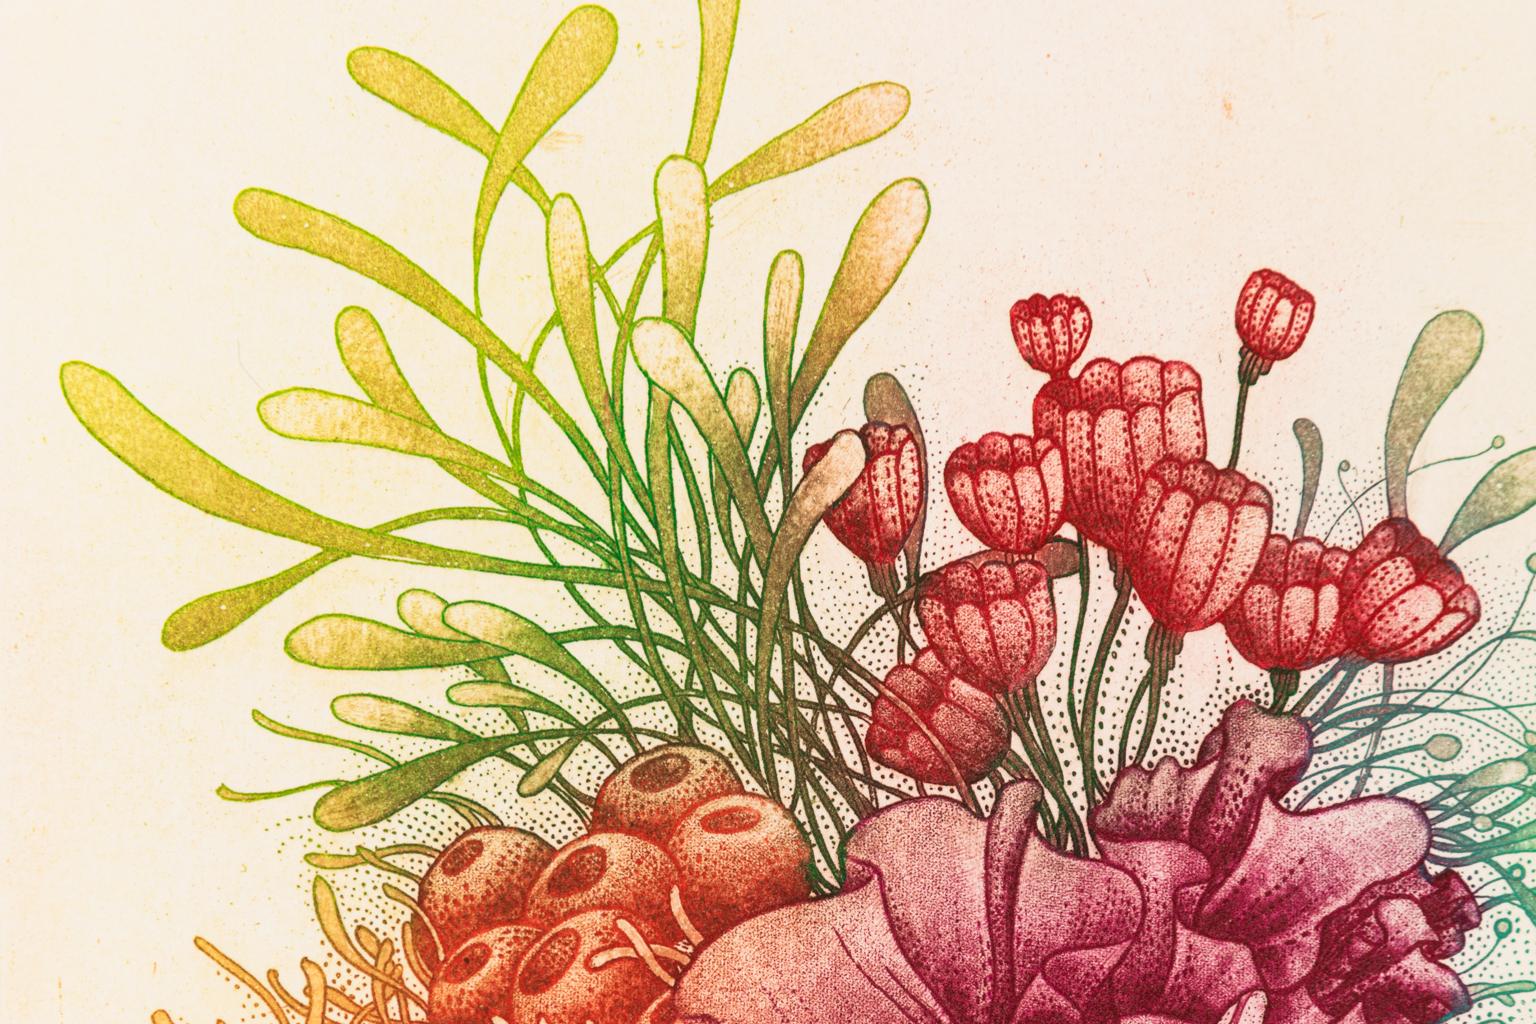 Coral Bouquet - Color Etching of Coral and Plant Life in Green, Orange, Red  - Print by Lauren Kussro